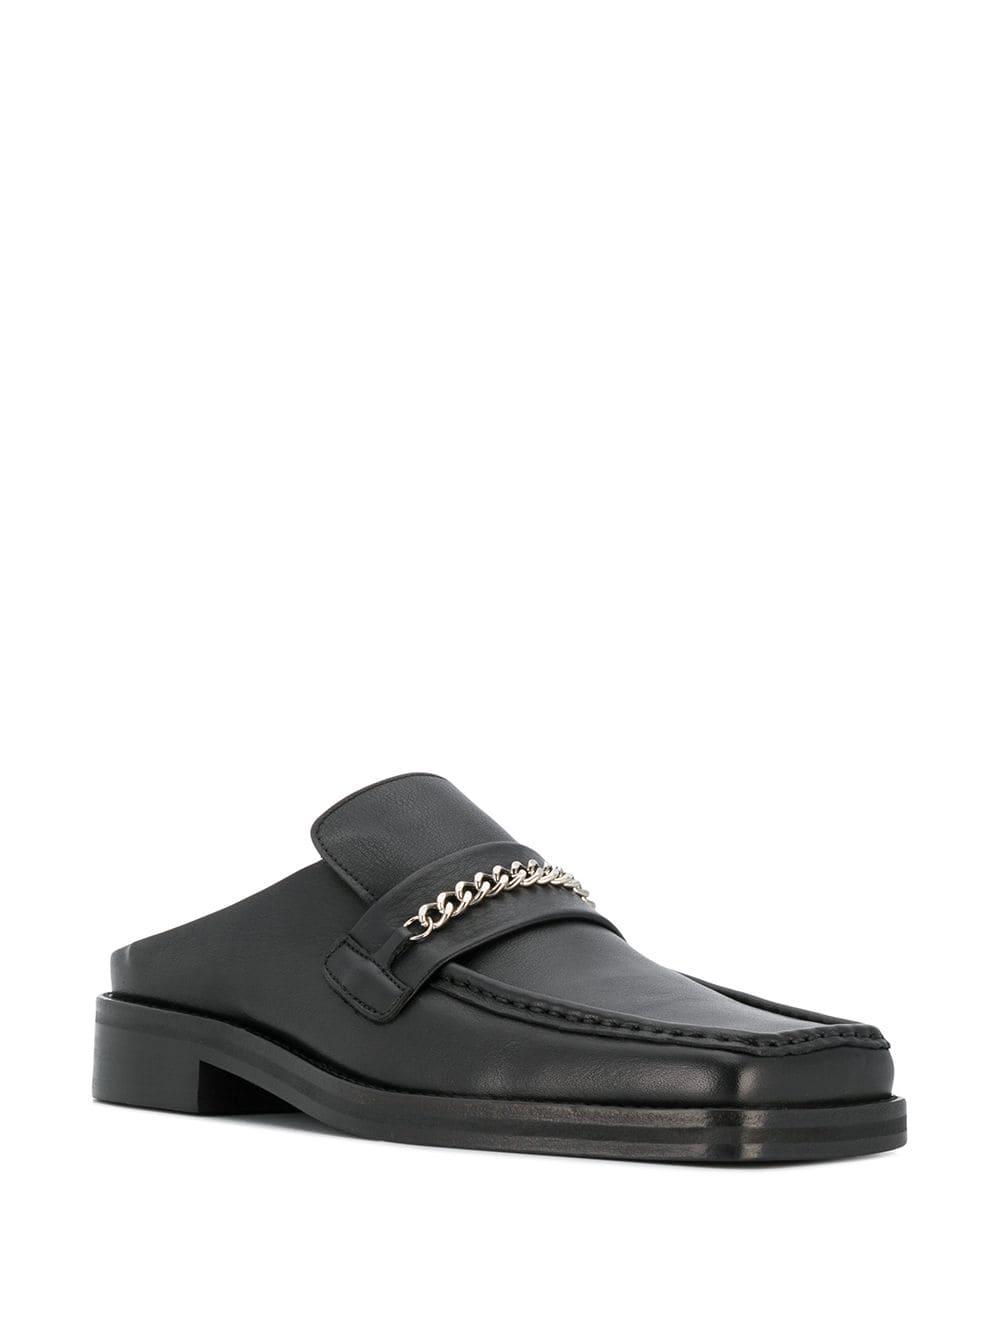 Martine Rose Leather Heelless Loafers in Black for Men - Lyst